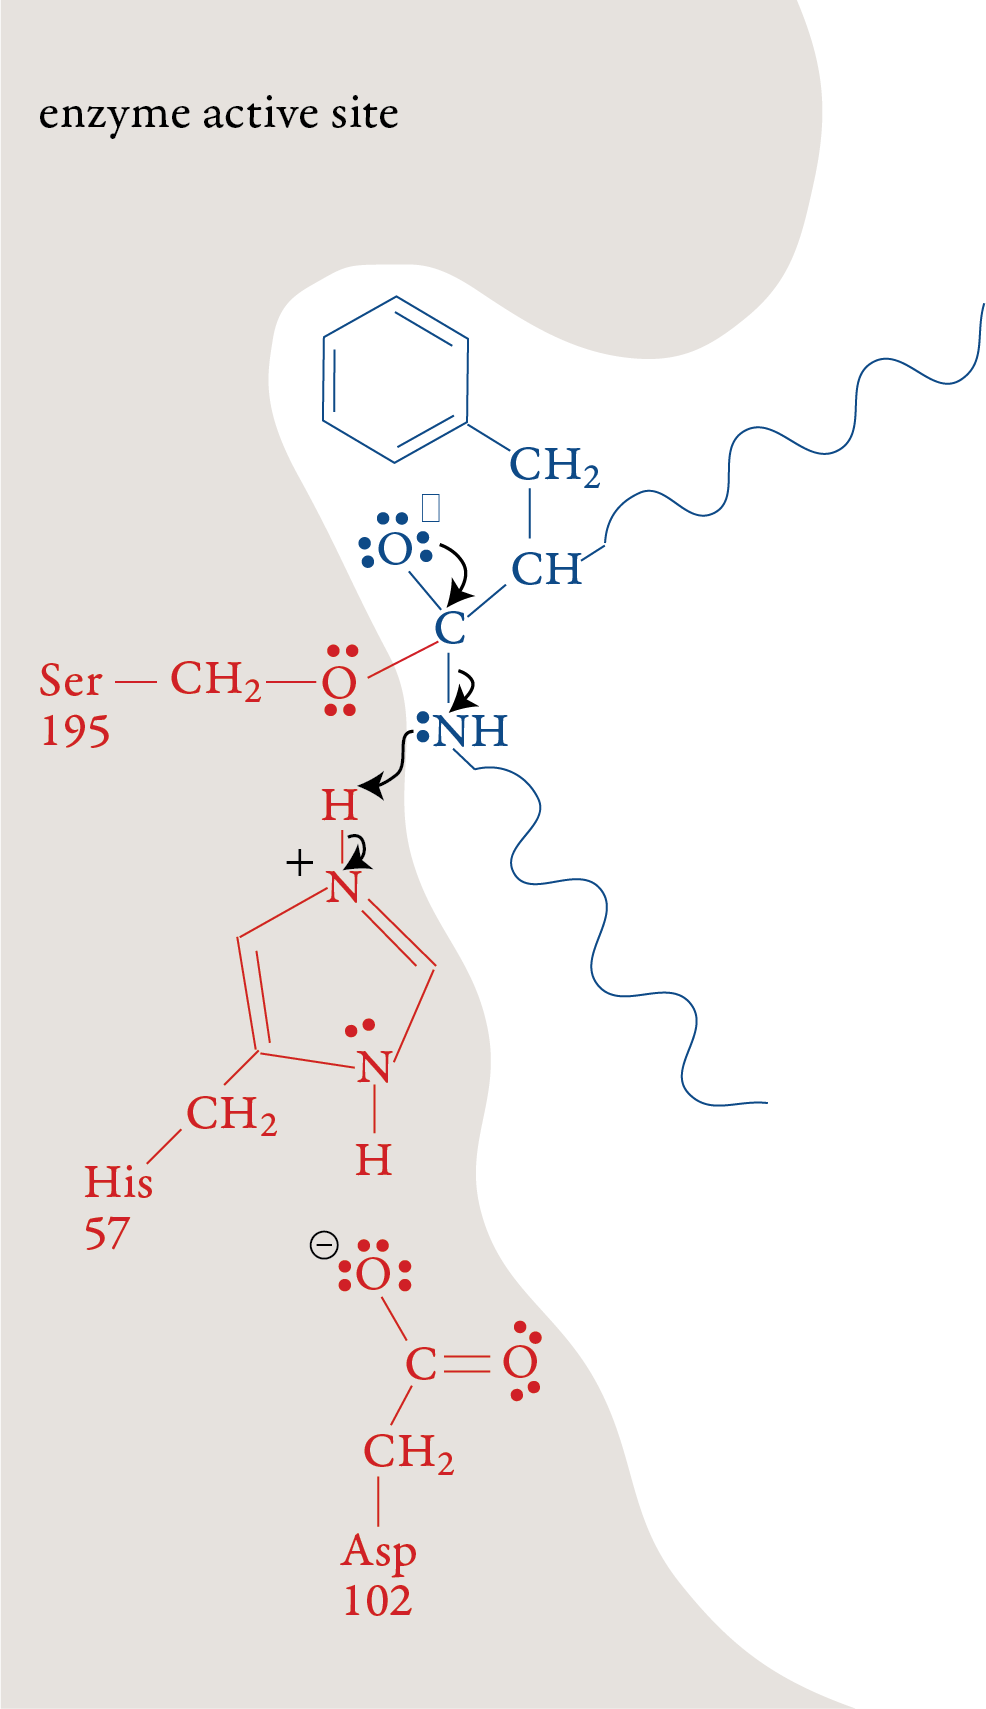 Image of the second step in the chymotrypsin mechanism